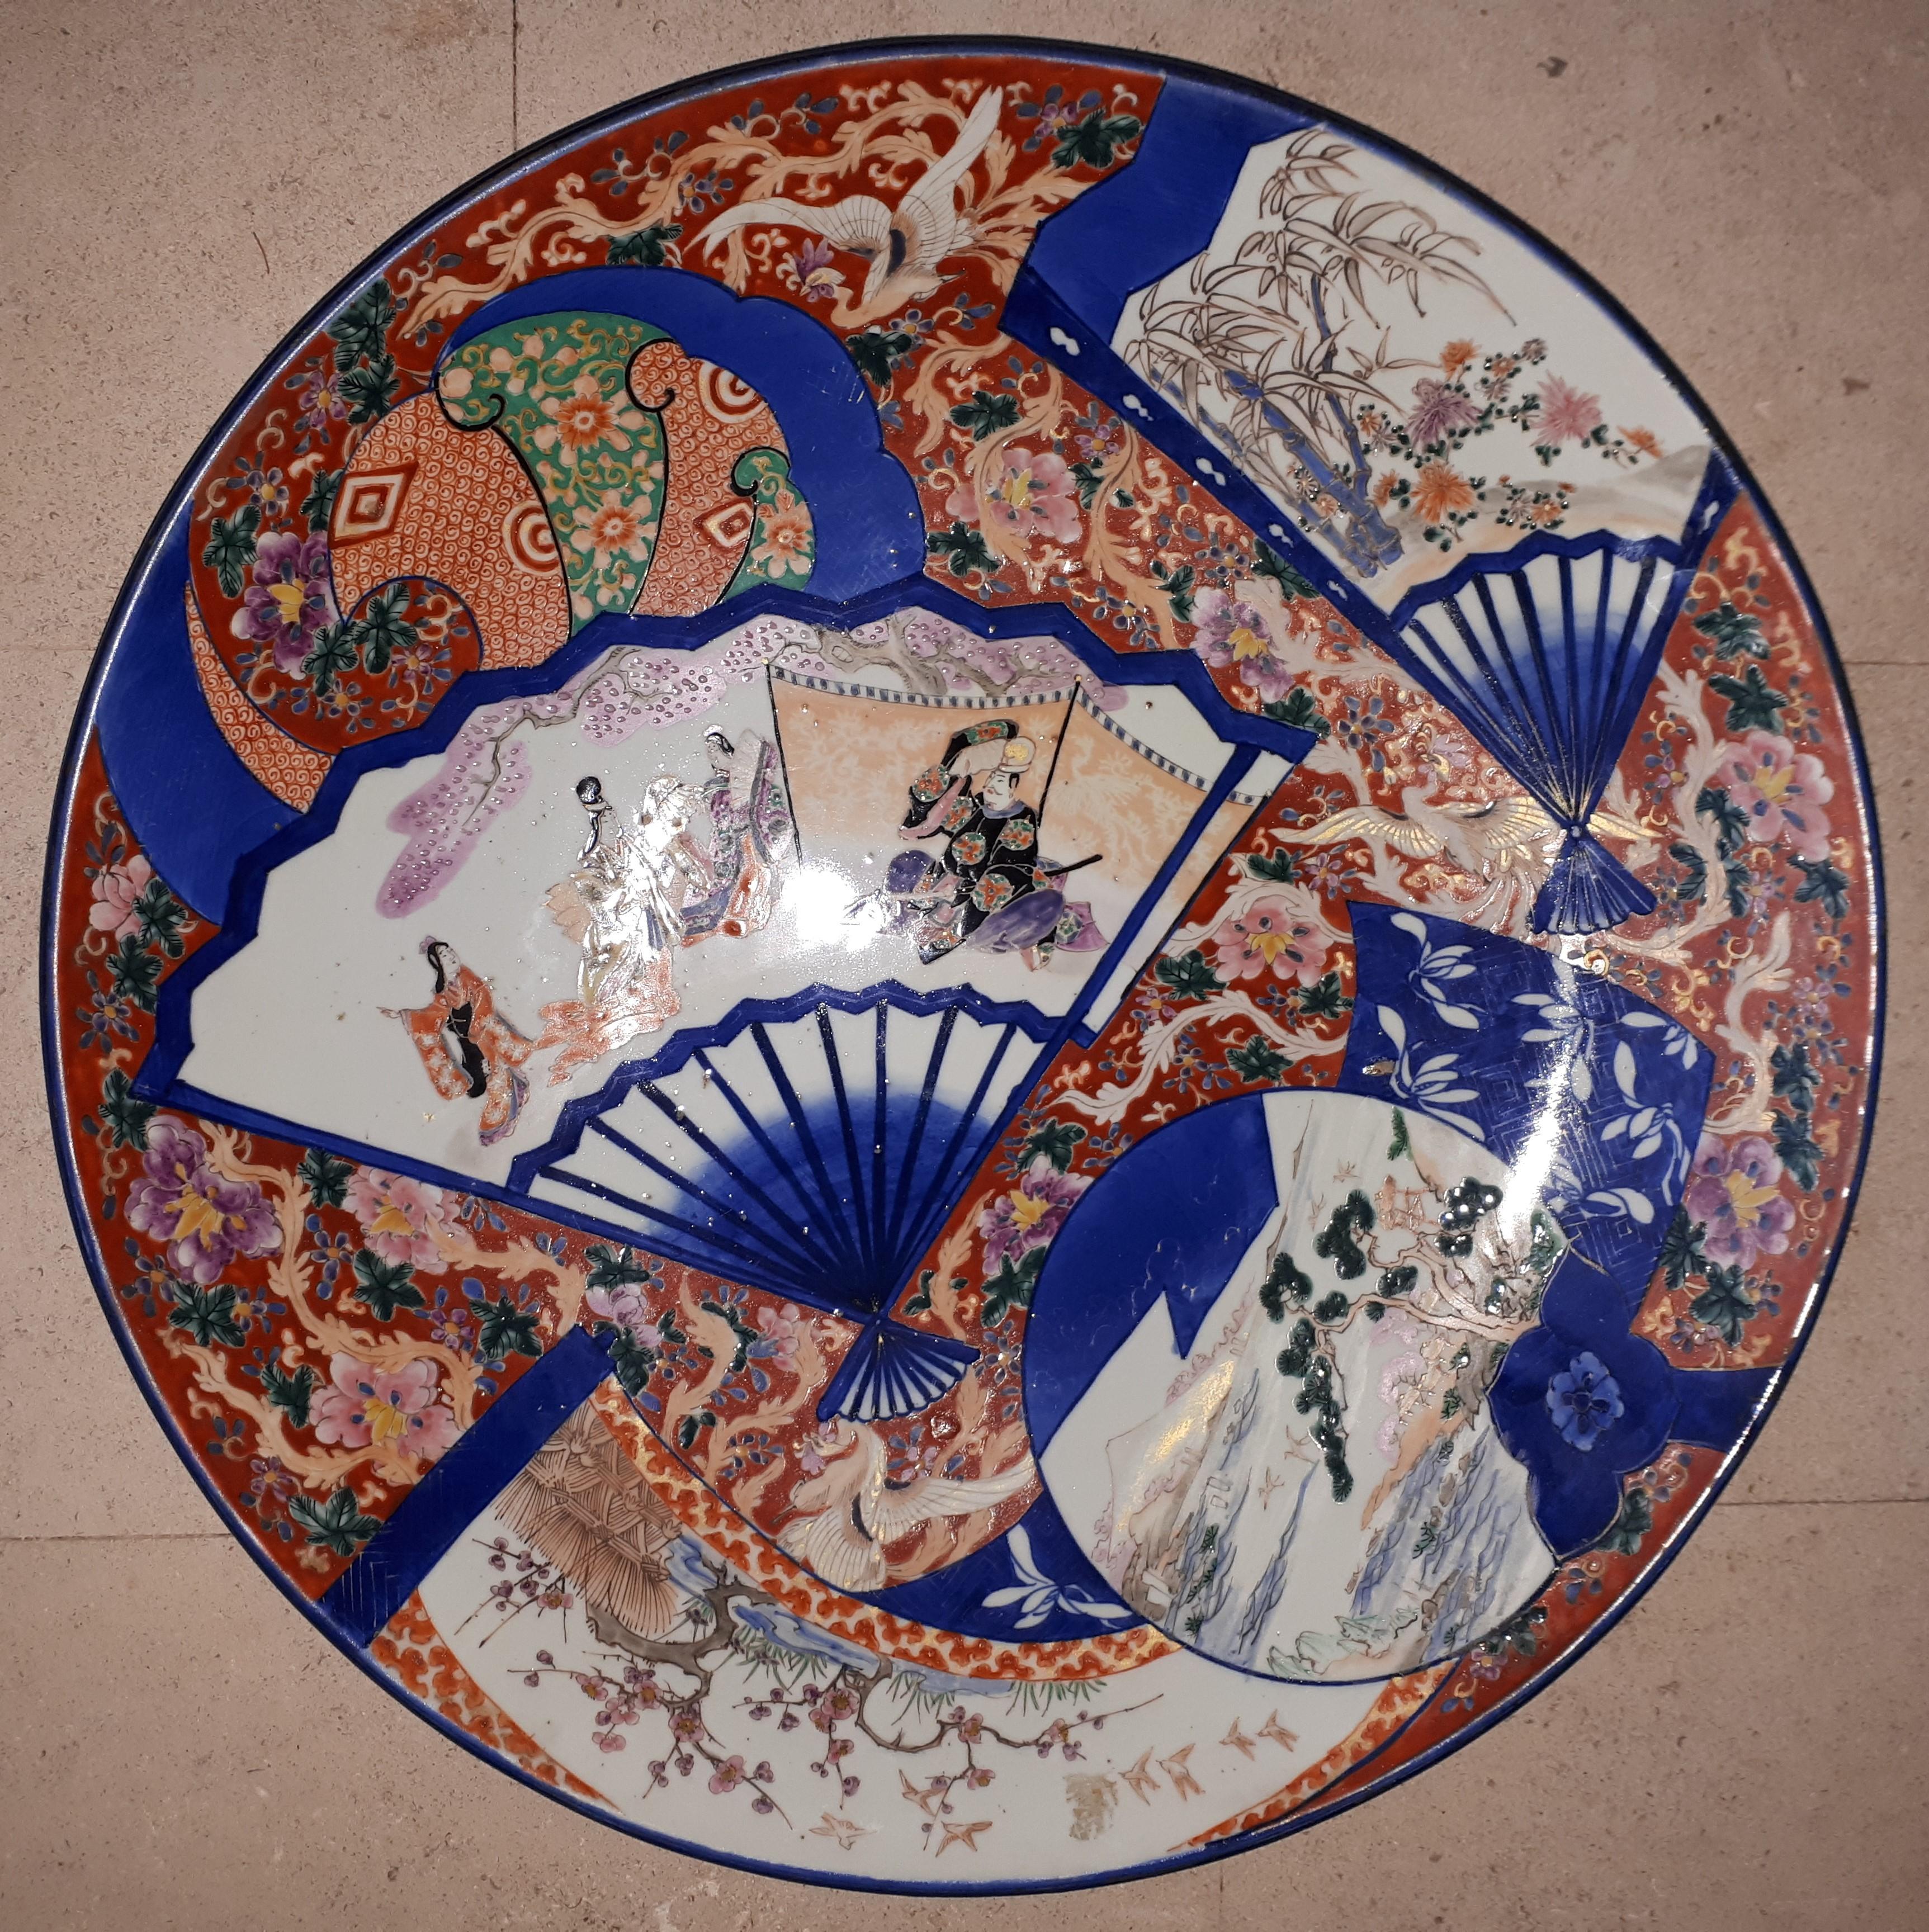 Important Arita porcelain dish, with polychrome decorations in blue reserves of different shapes, the coral background embellished with phoenixes and flowers. Japan, 18th century.